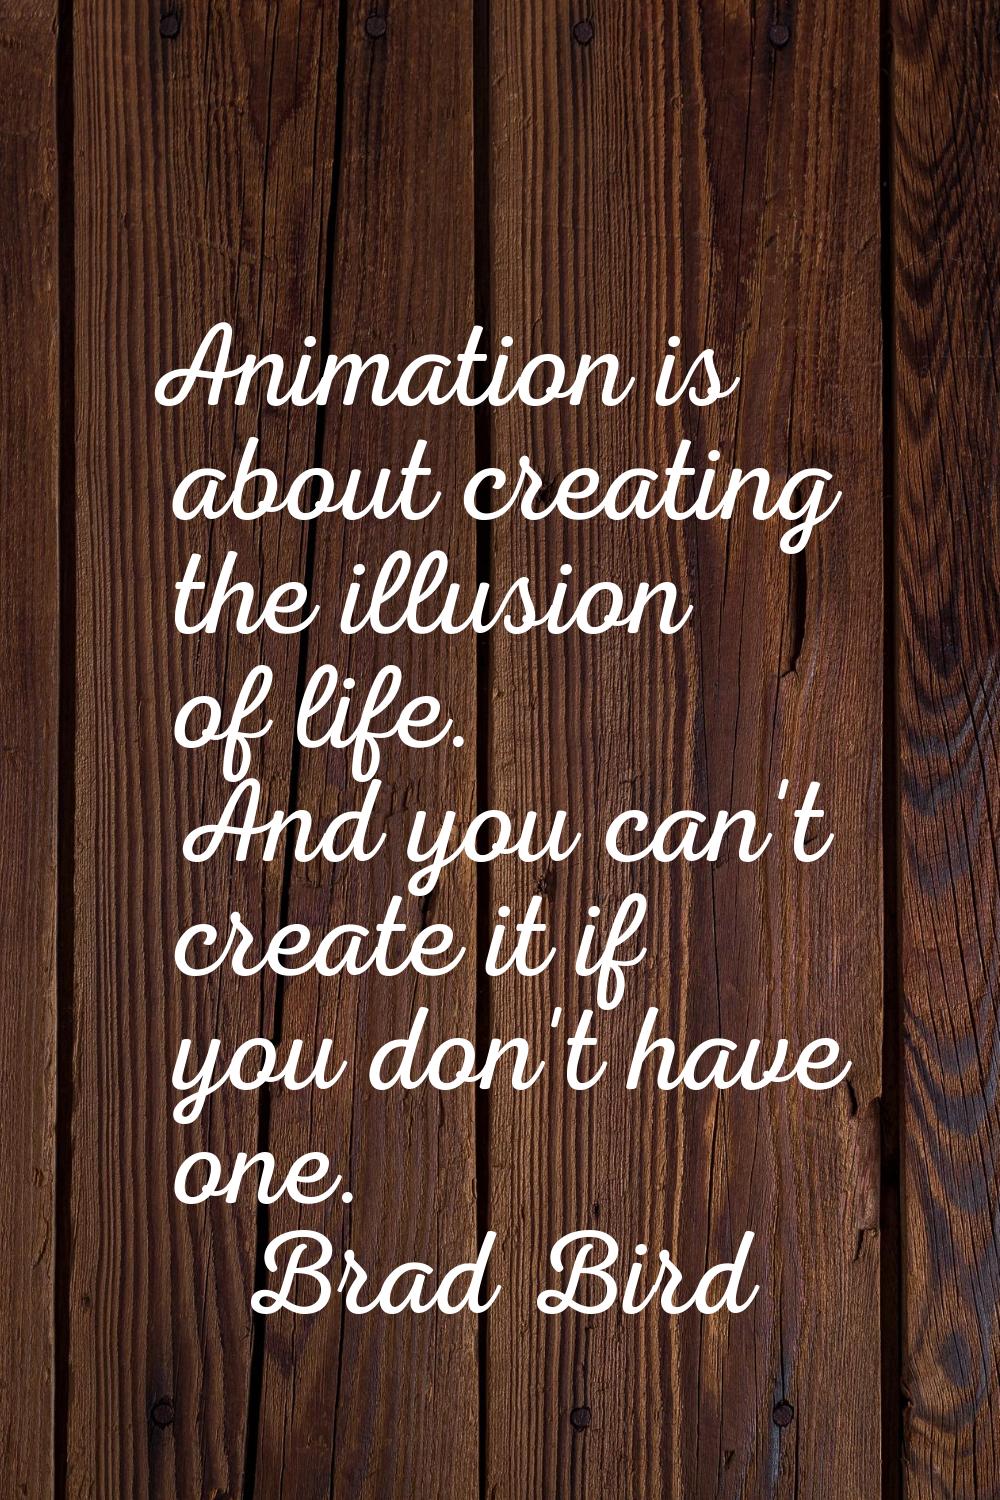 Animation is about creating the illusion of life. And you can't create it if you don't have one.